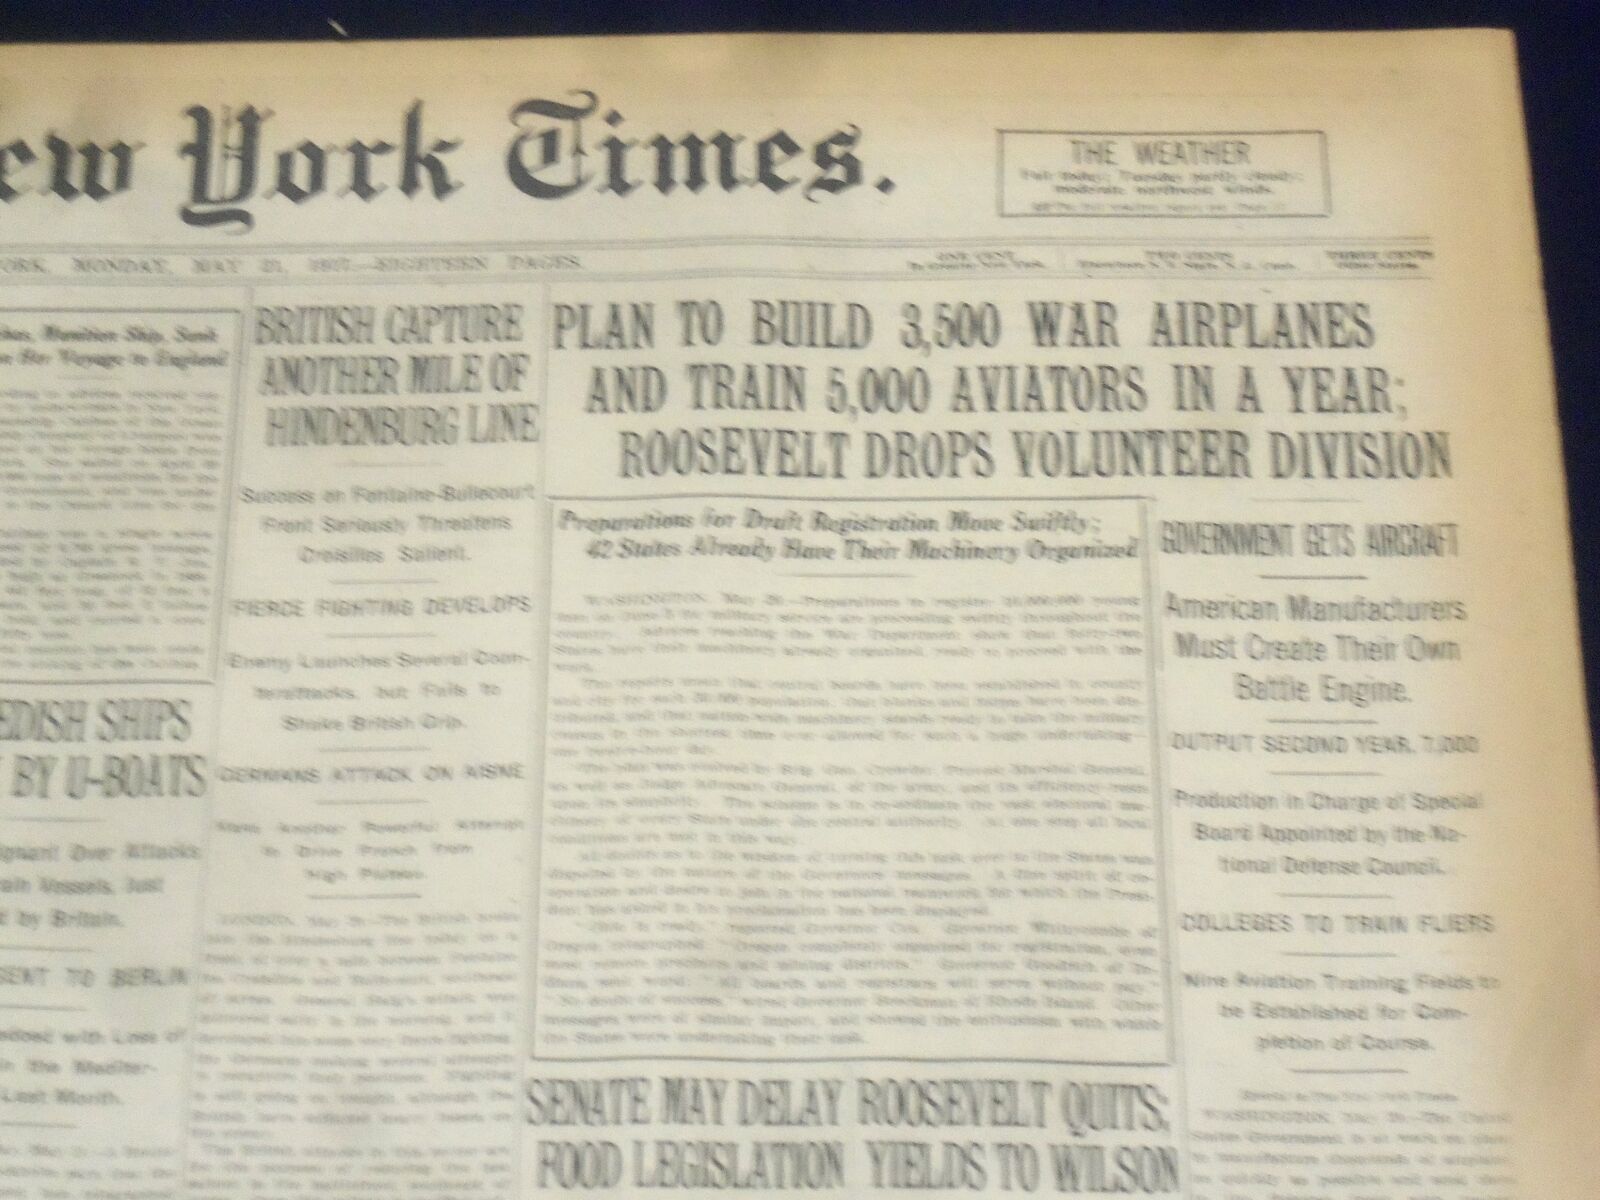 1917 MAY 21 NEW YORK TIMES - PLAN TO BUILD 3,500 WAR PLANES - NT 9152